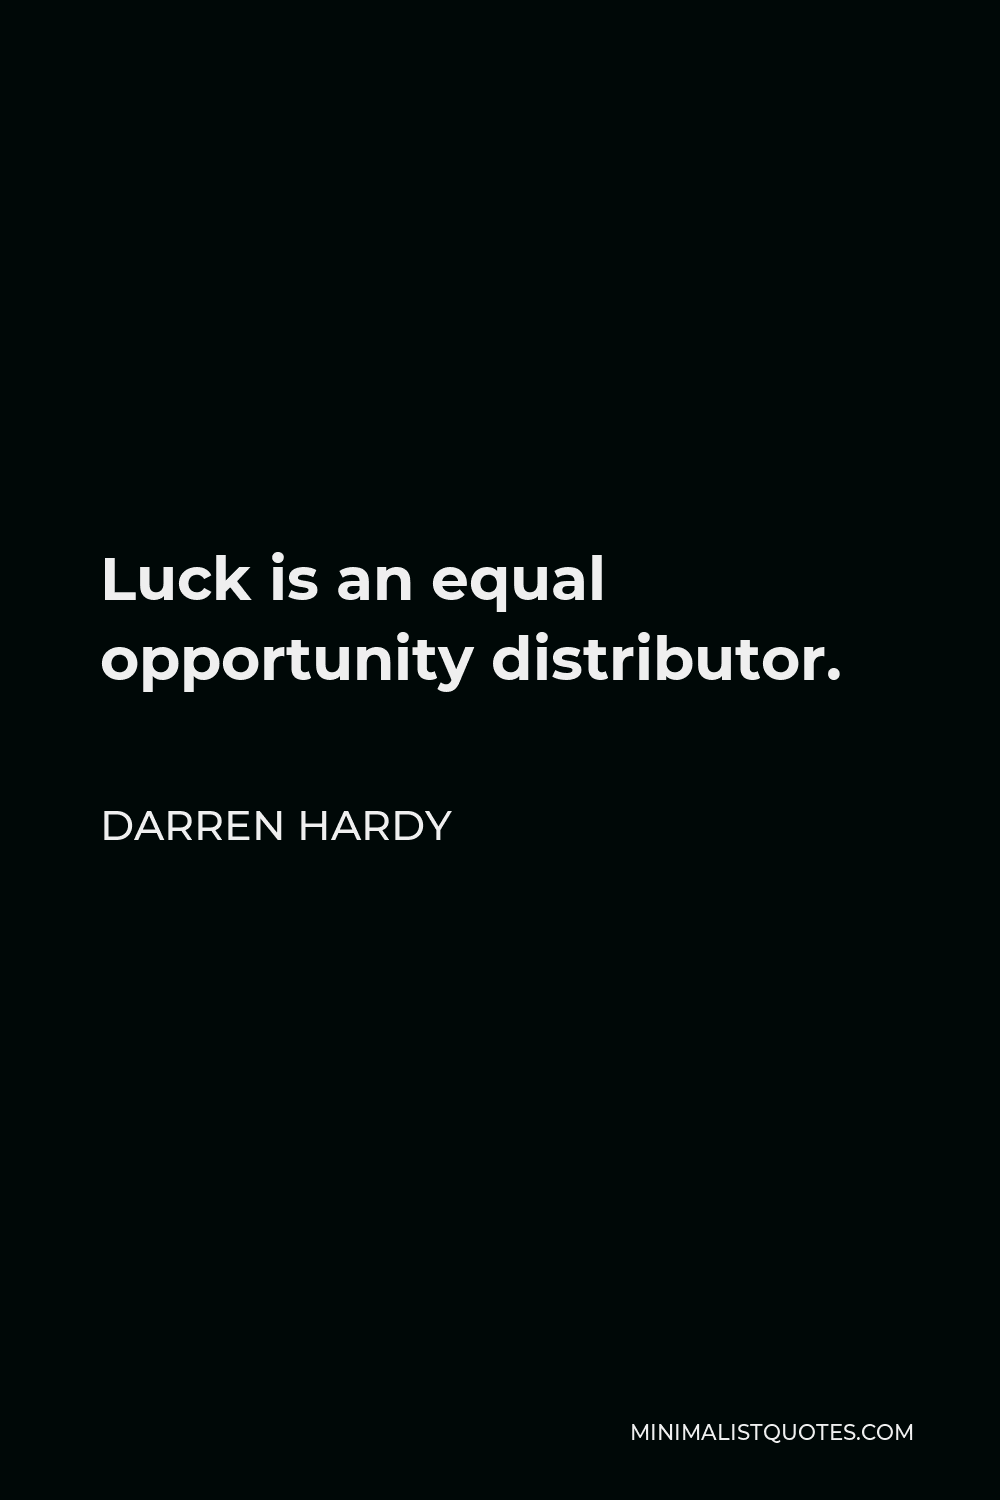 Darren Hardy Quote - Luck is an equal opportunity distributor.